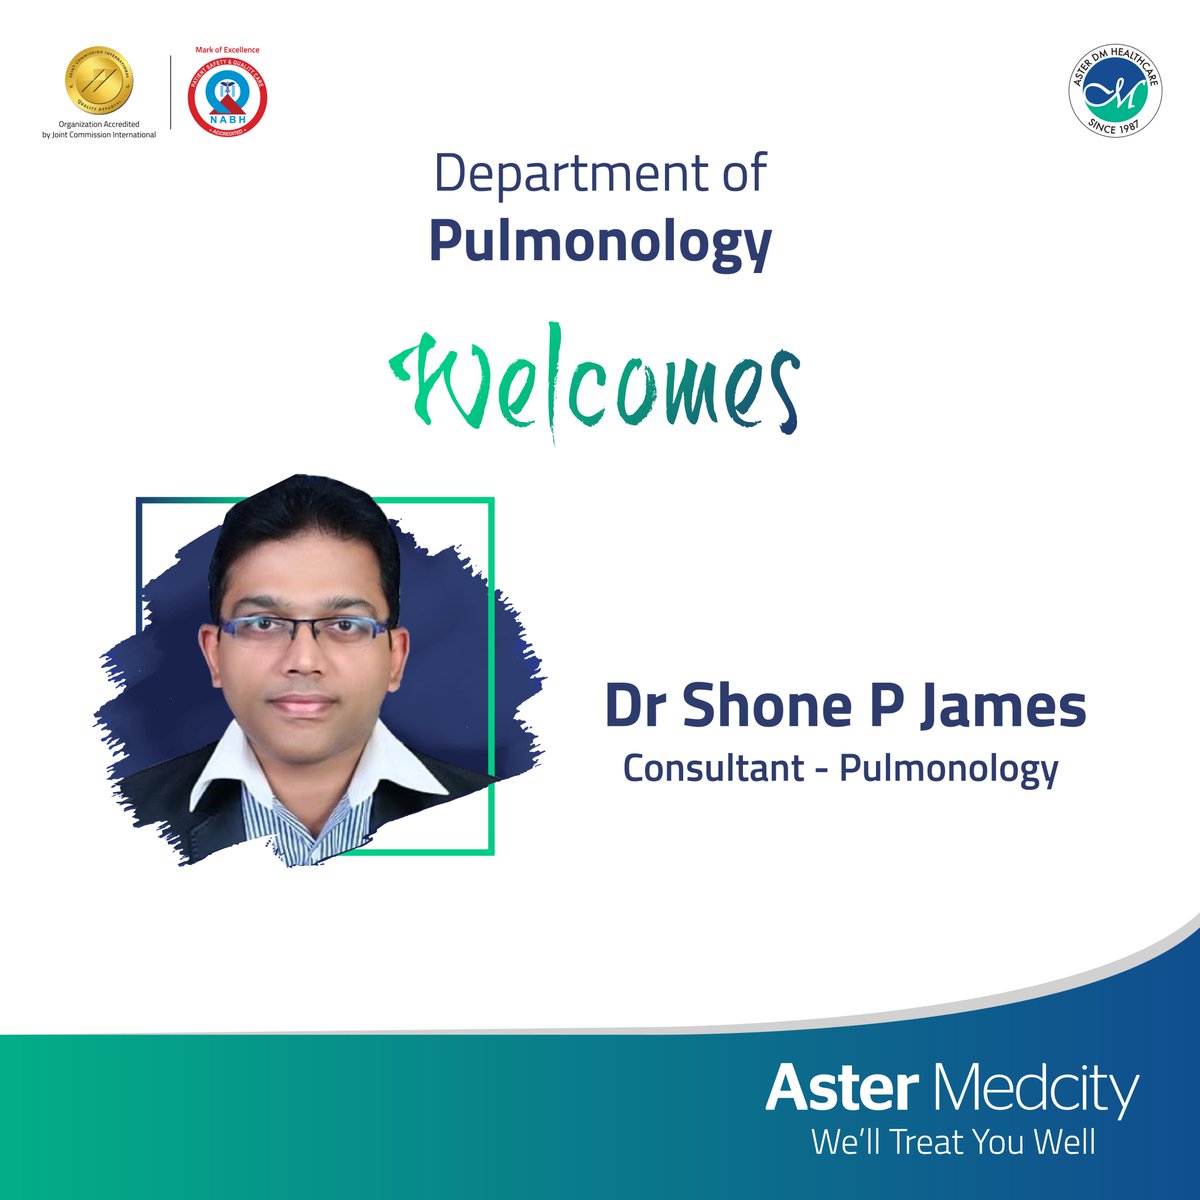 Exciting News at Aster Medcity! Thrilled to welcome Dr. Shone P James, as a Consultant in Pulmonology, at Aster Medcity. He is specialized in treating Allergic disorders, Asthma, COPD, Sleep disorders , Respiratory infections etc. 🧑‍⚕️asterhospitals.in/doctors/aster-… 📲 8111998098